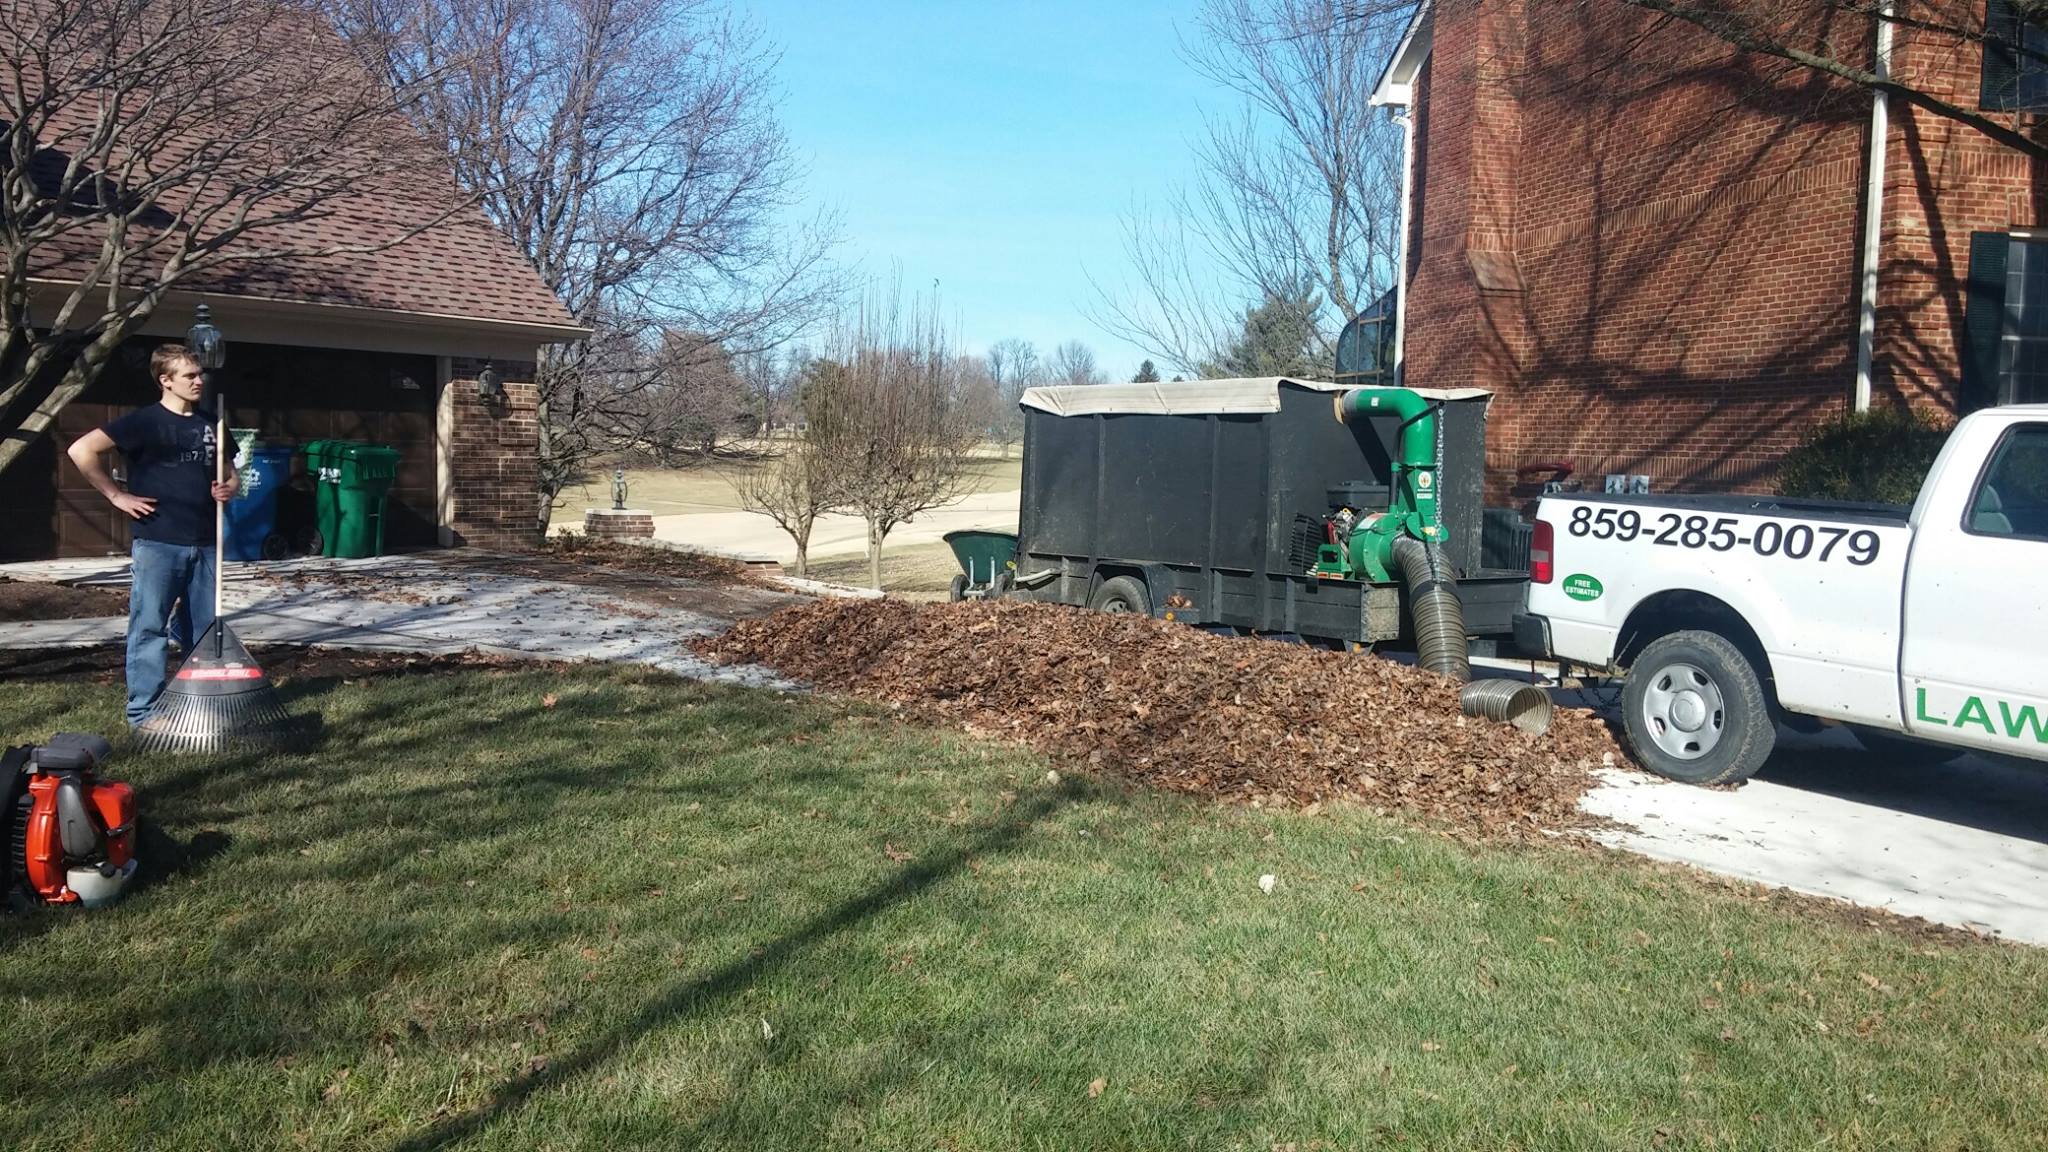 What Landscaping Company Services Are Available? What Landscaping Tasks can They Help You With?